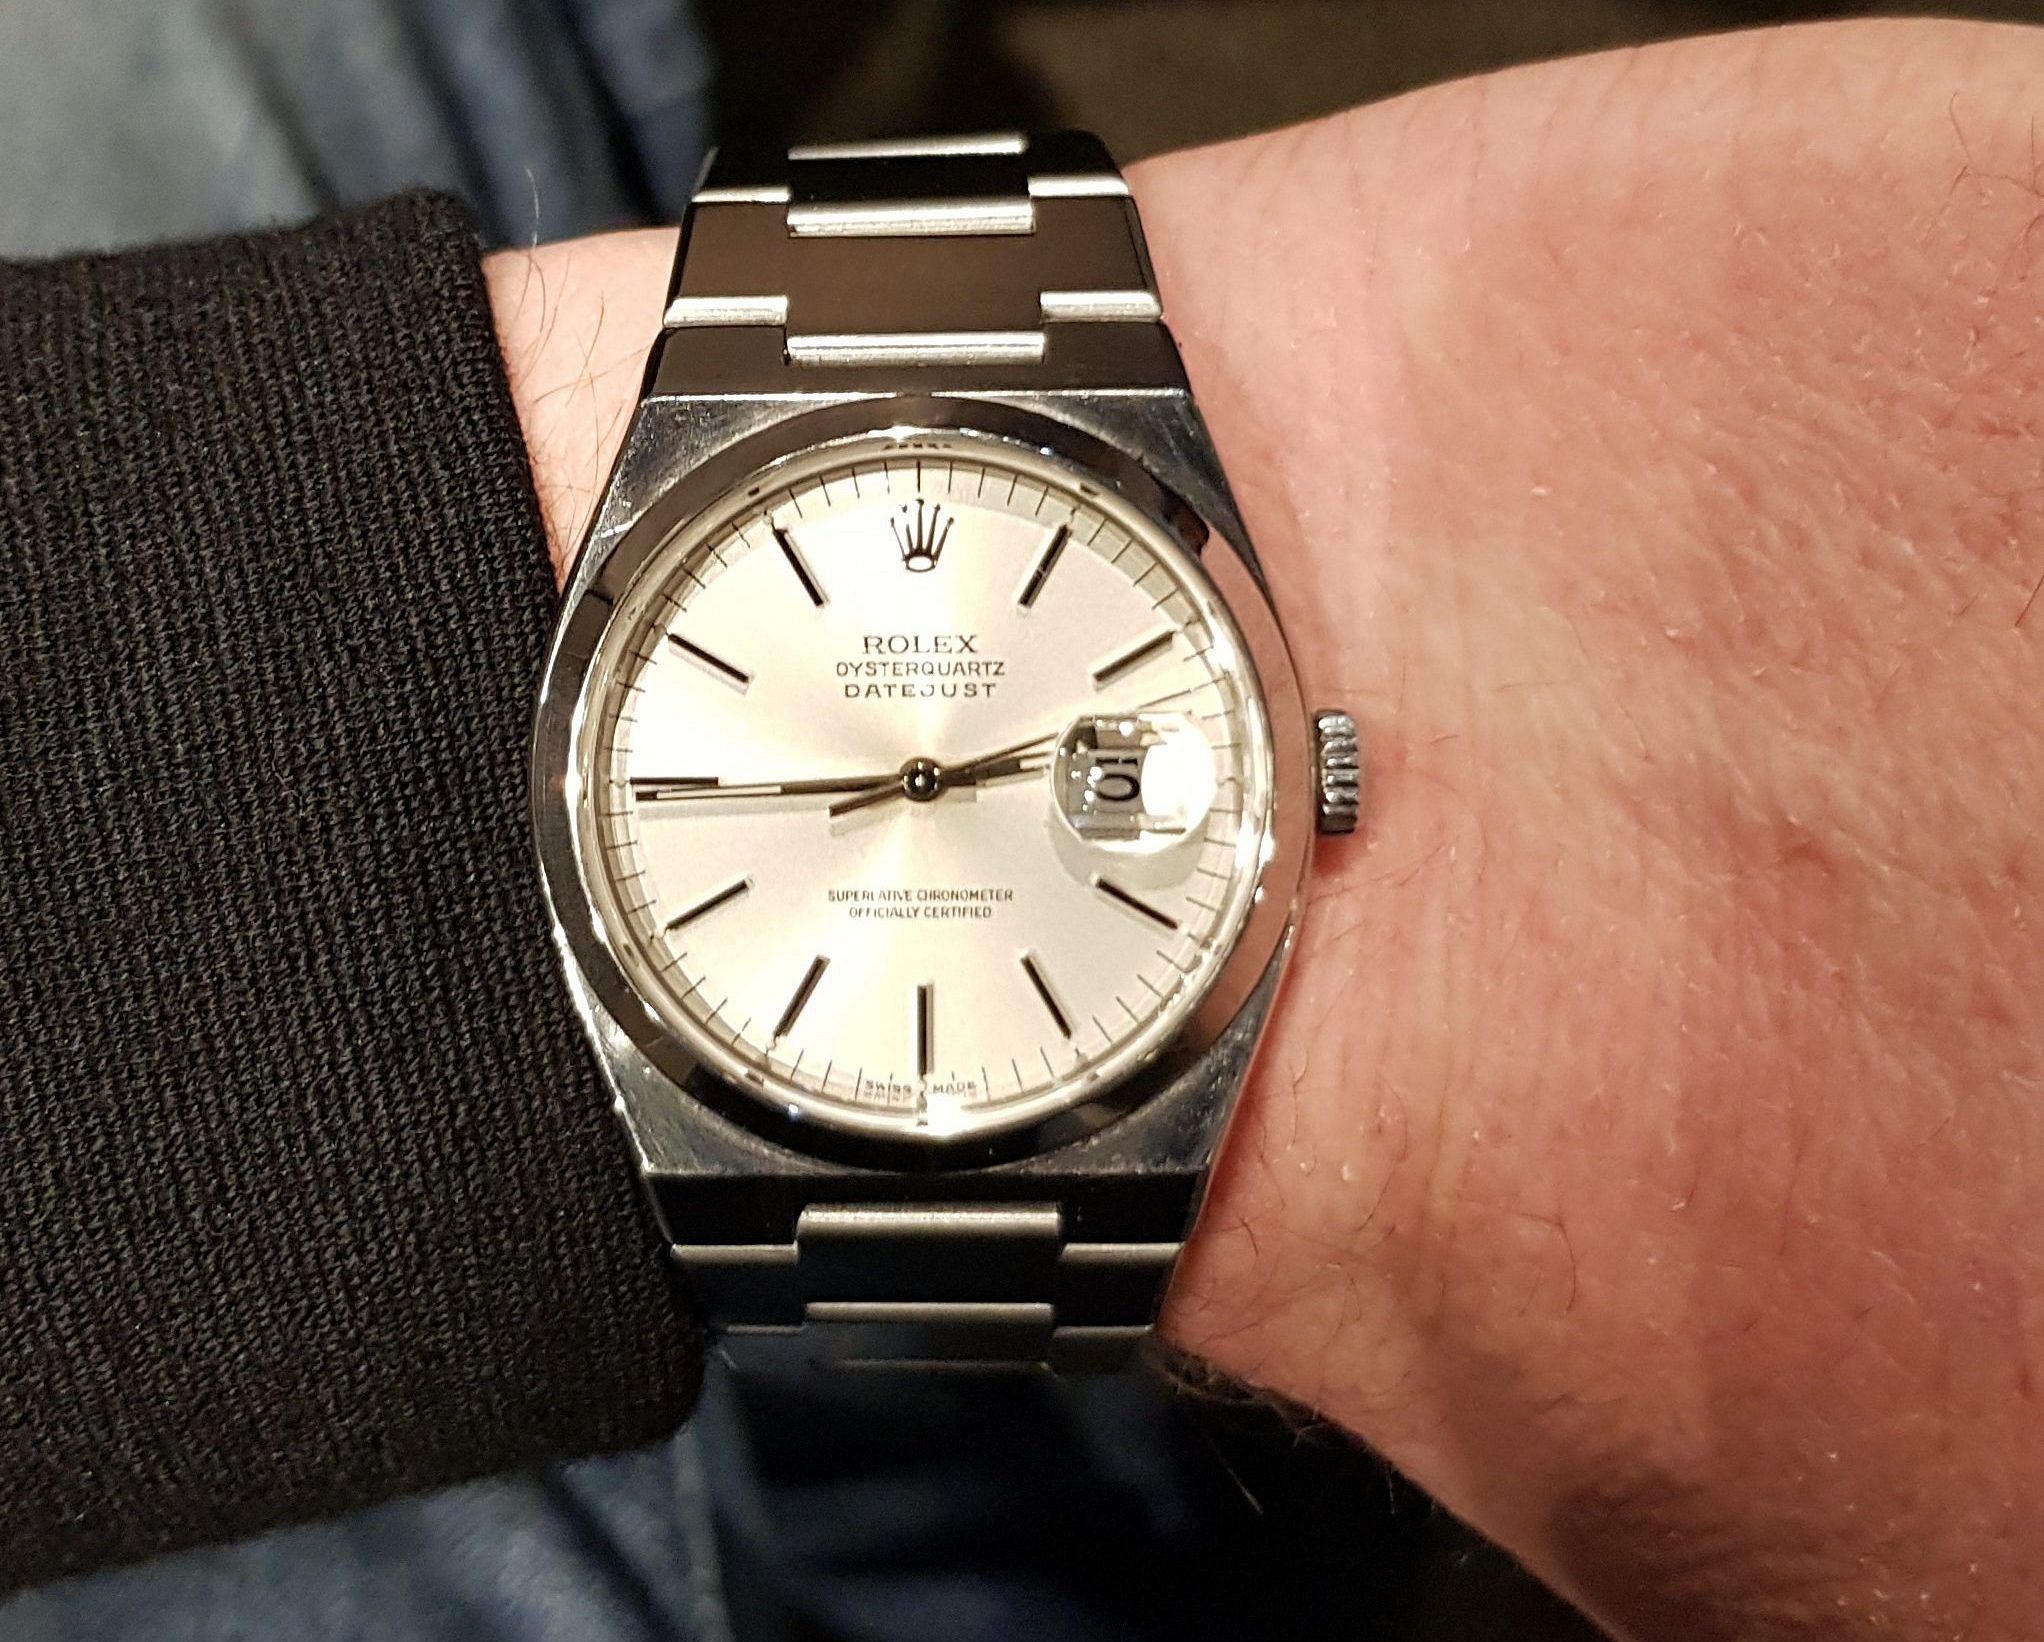 Weekend watch spotting with JR: #3